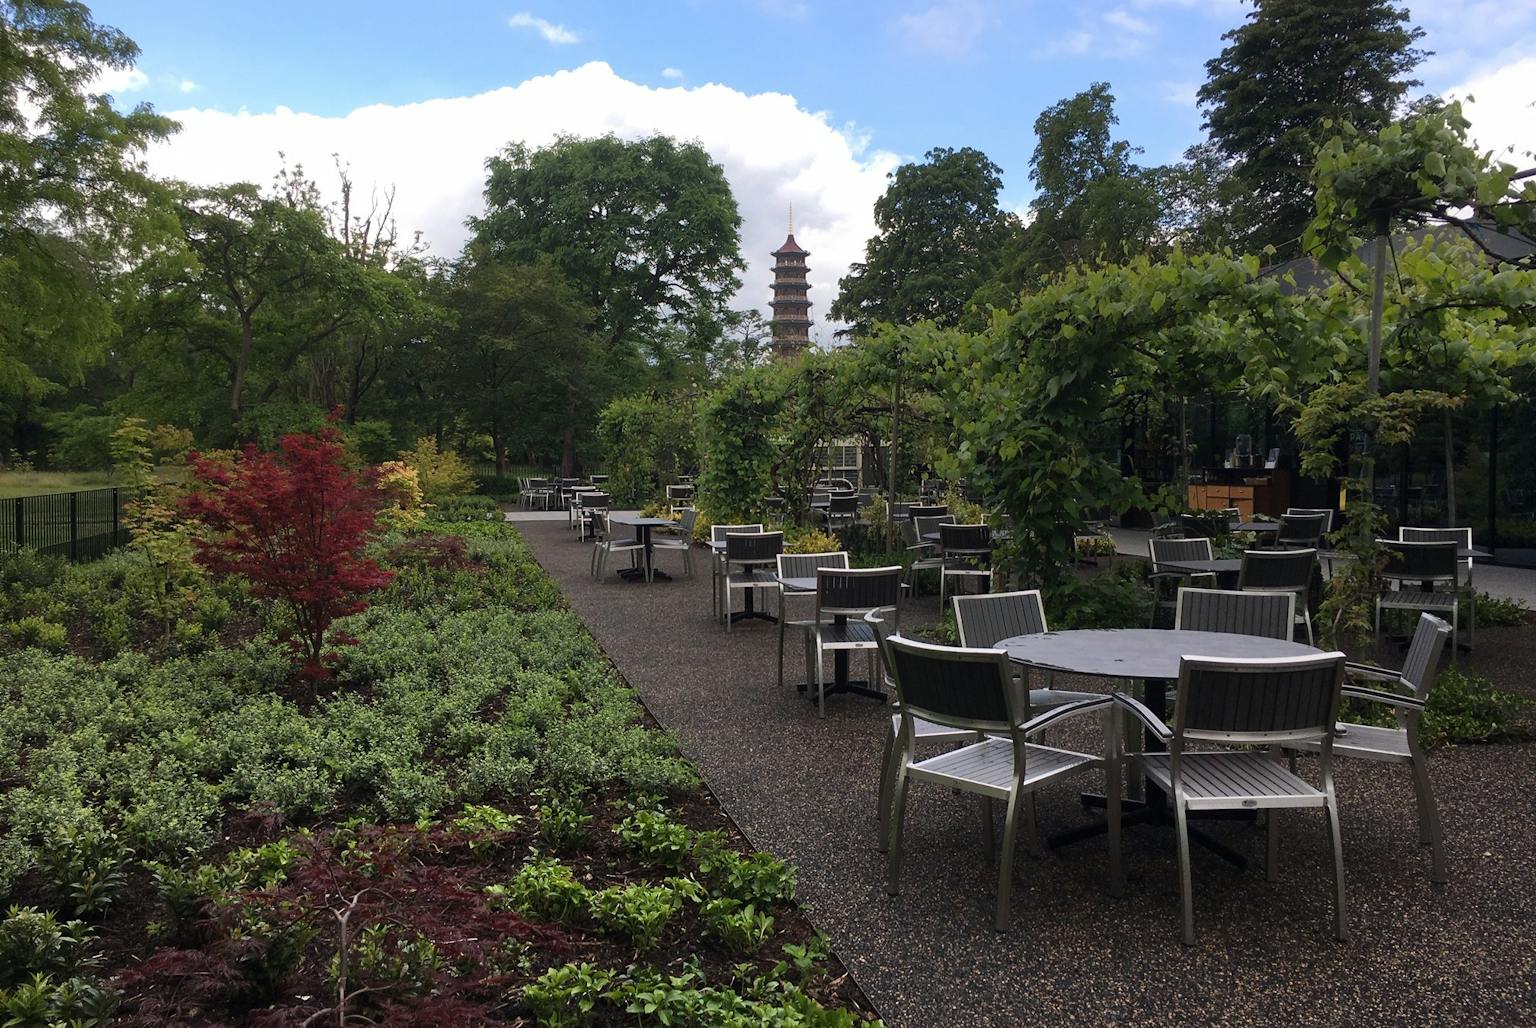 Kew Pavilion restaurant opens after LUC design and planning advice